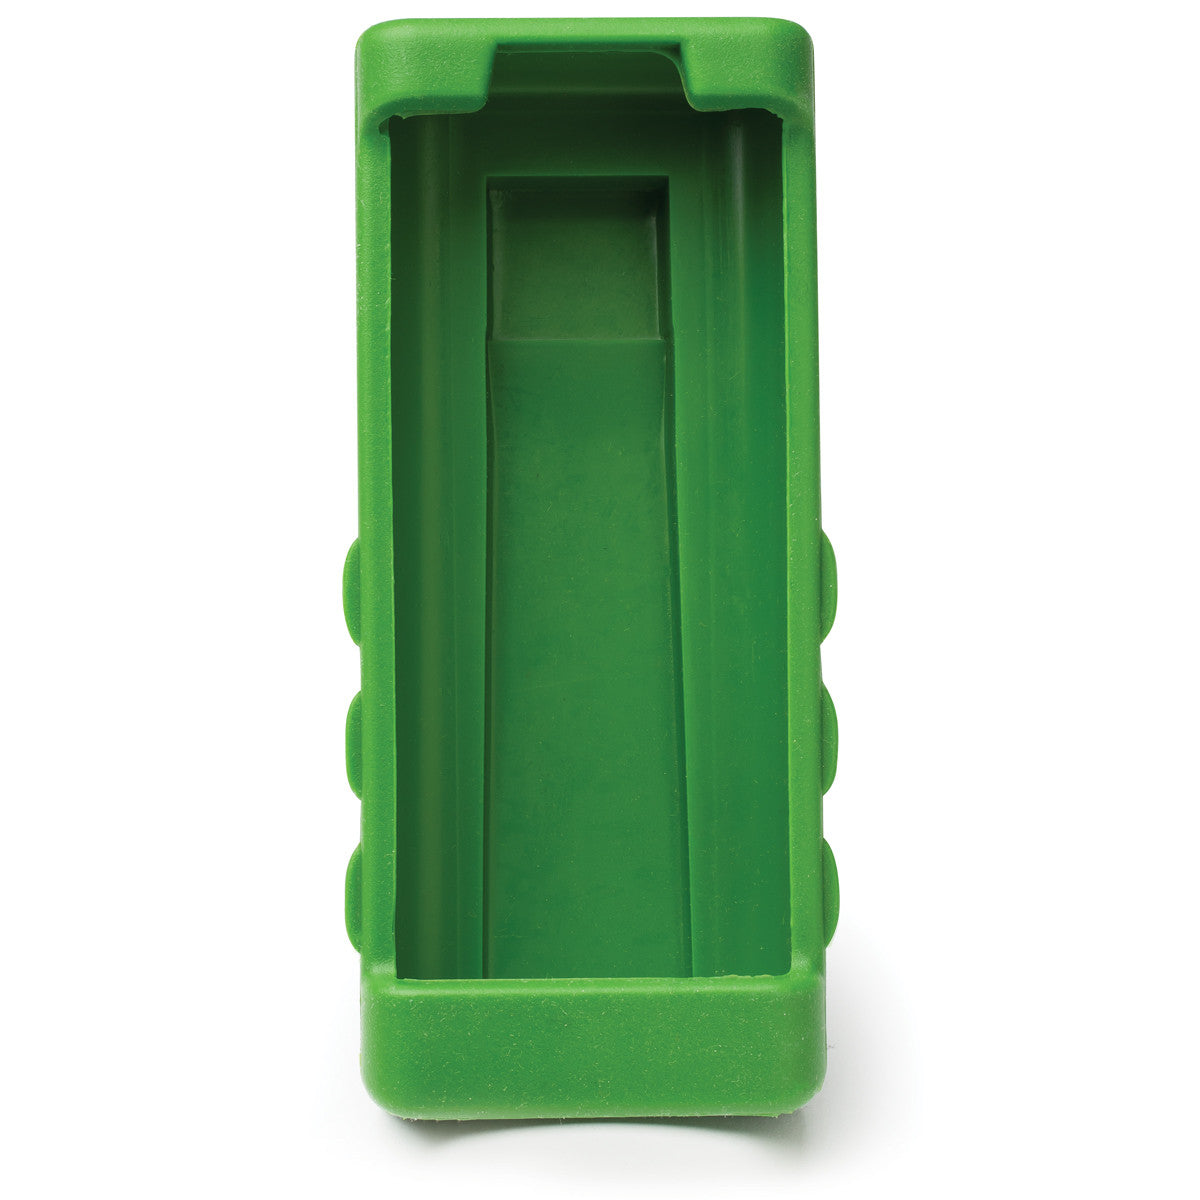 Green Shockproof Rubber Boot for Hanna Meters measuring 6”x2.3”x12”